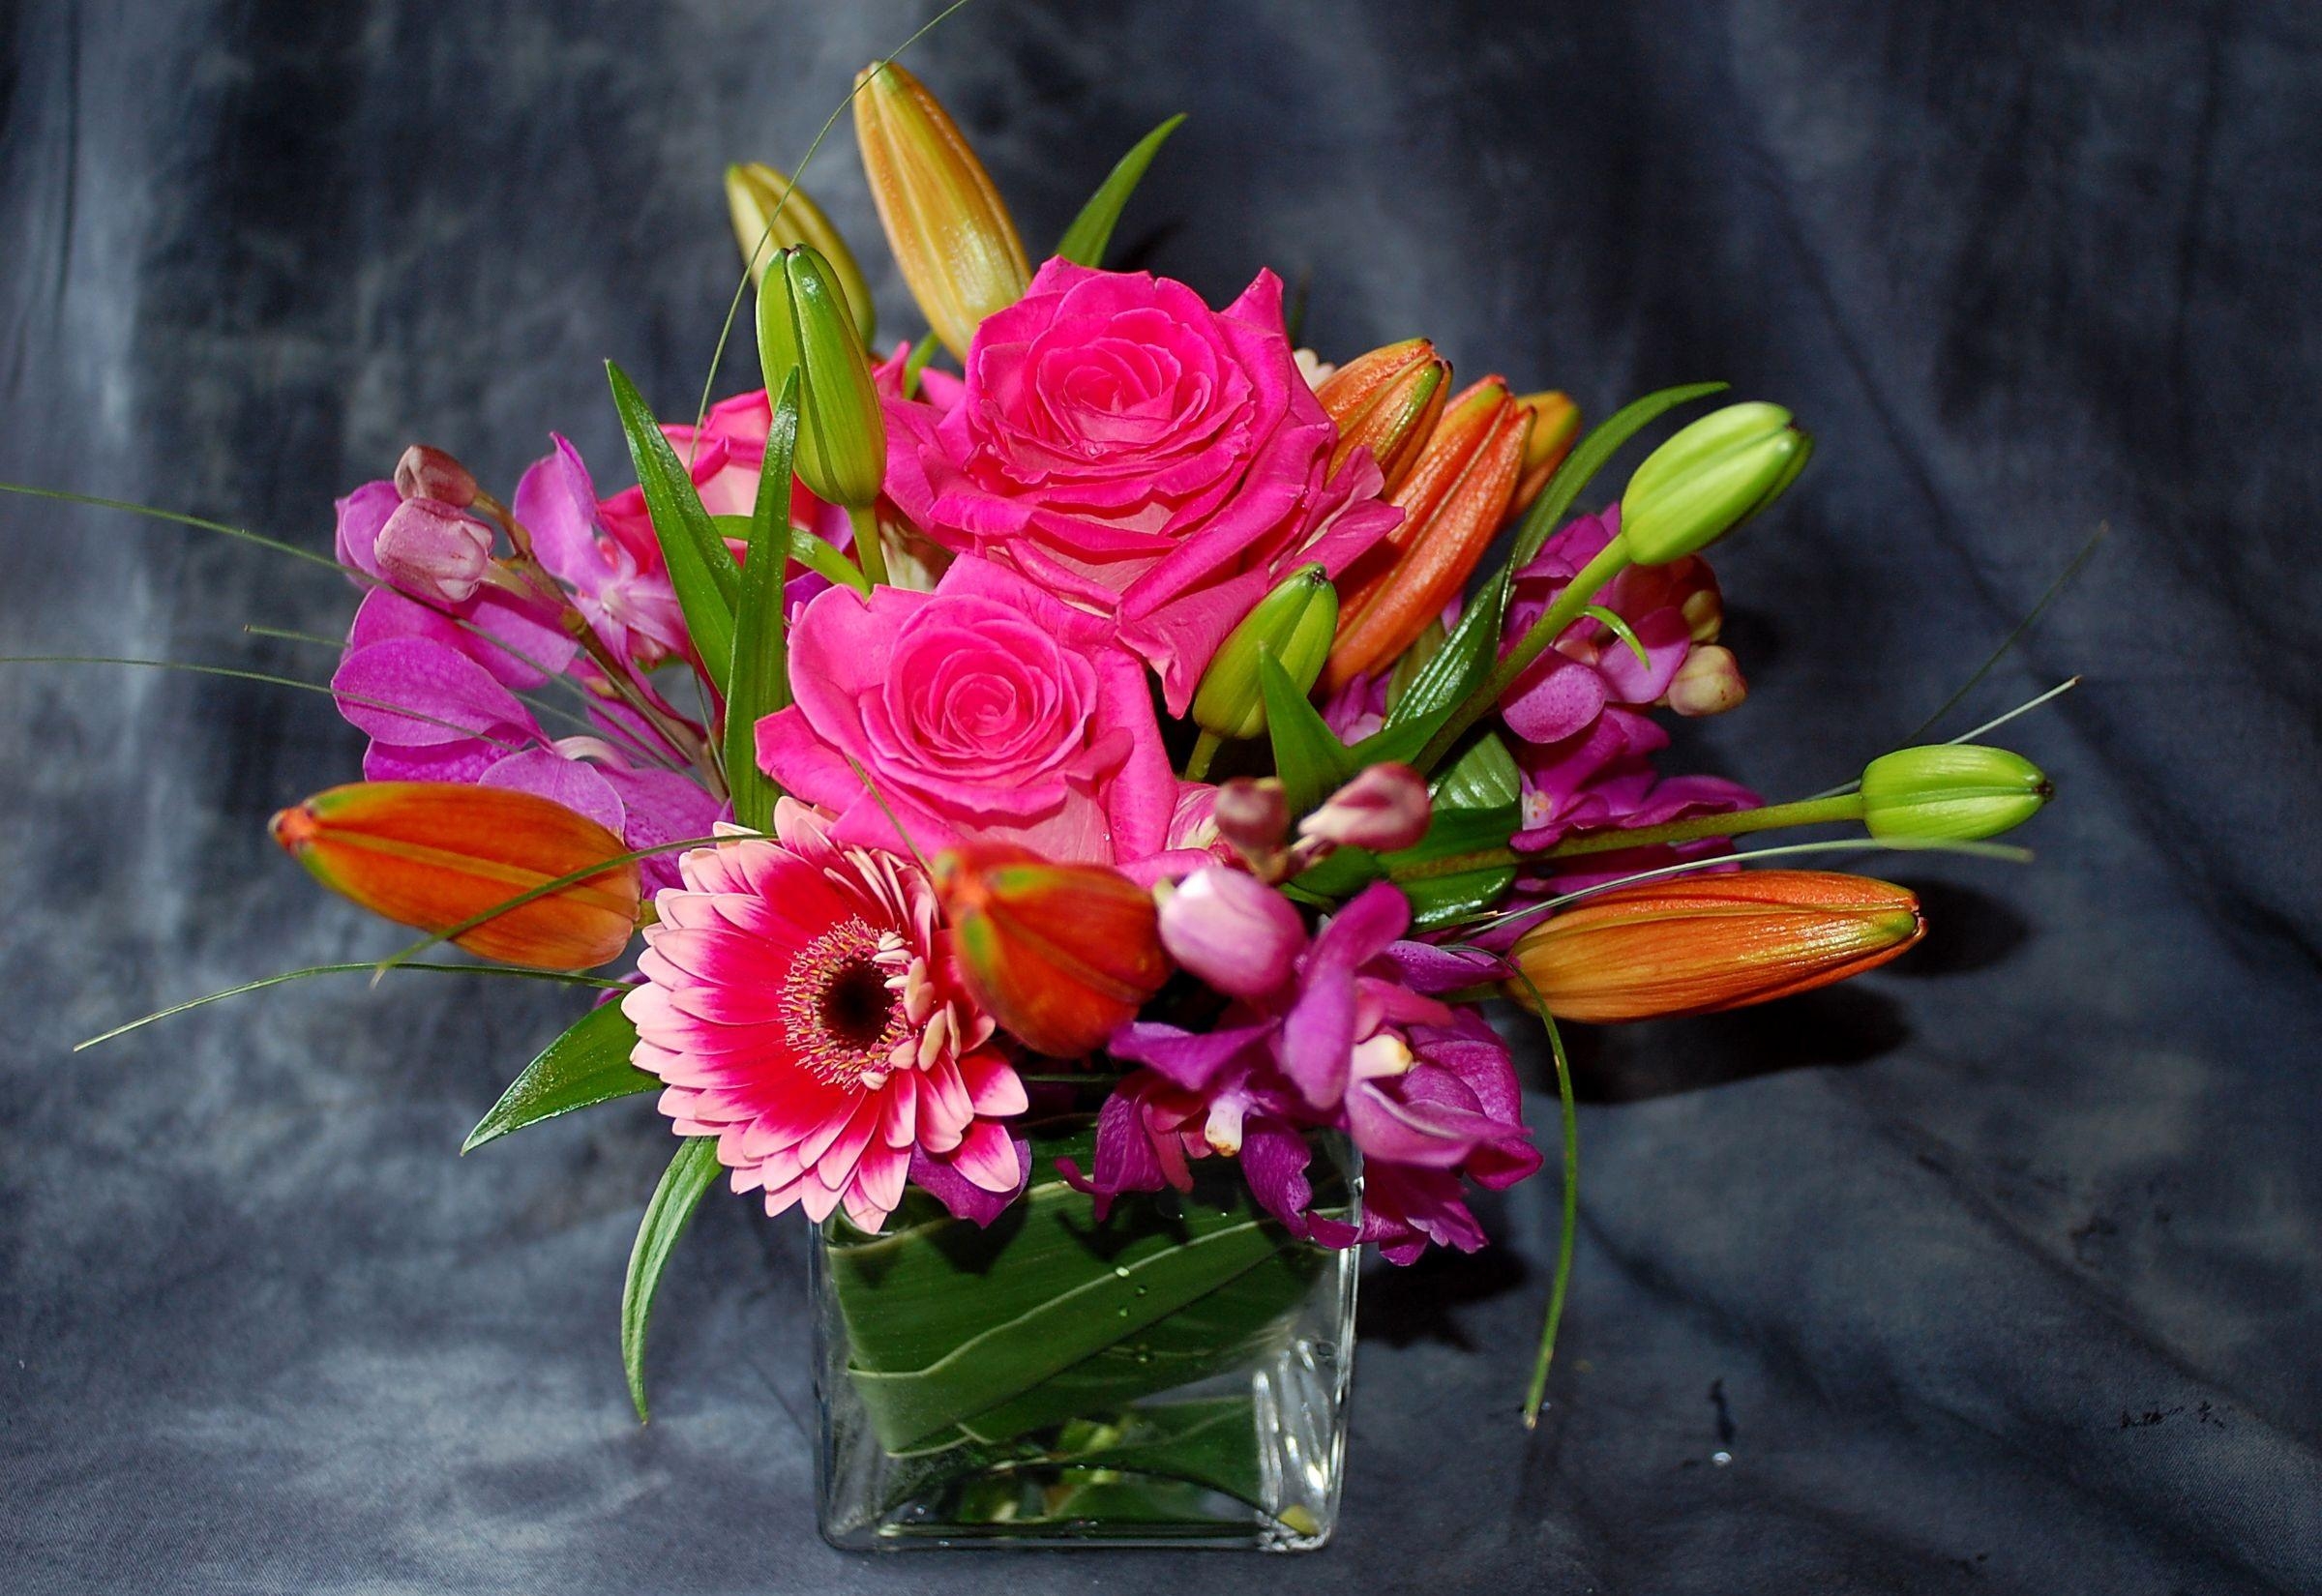 roses, orchids, flowers, gerberas, buds, composition images